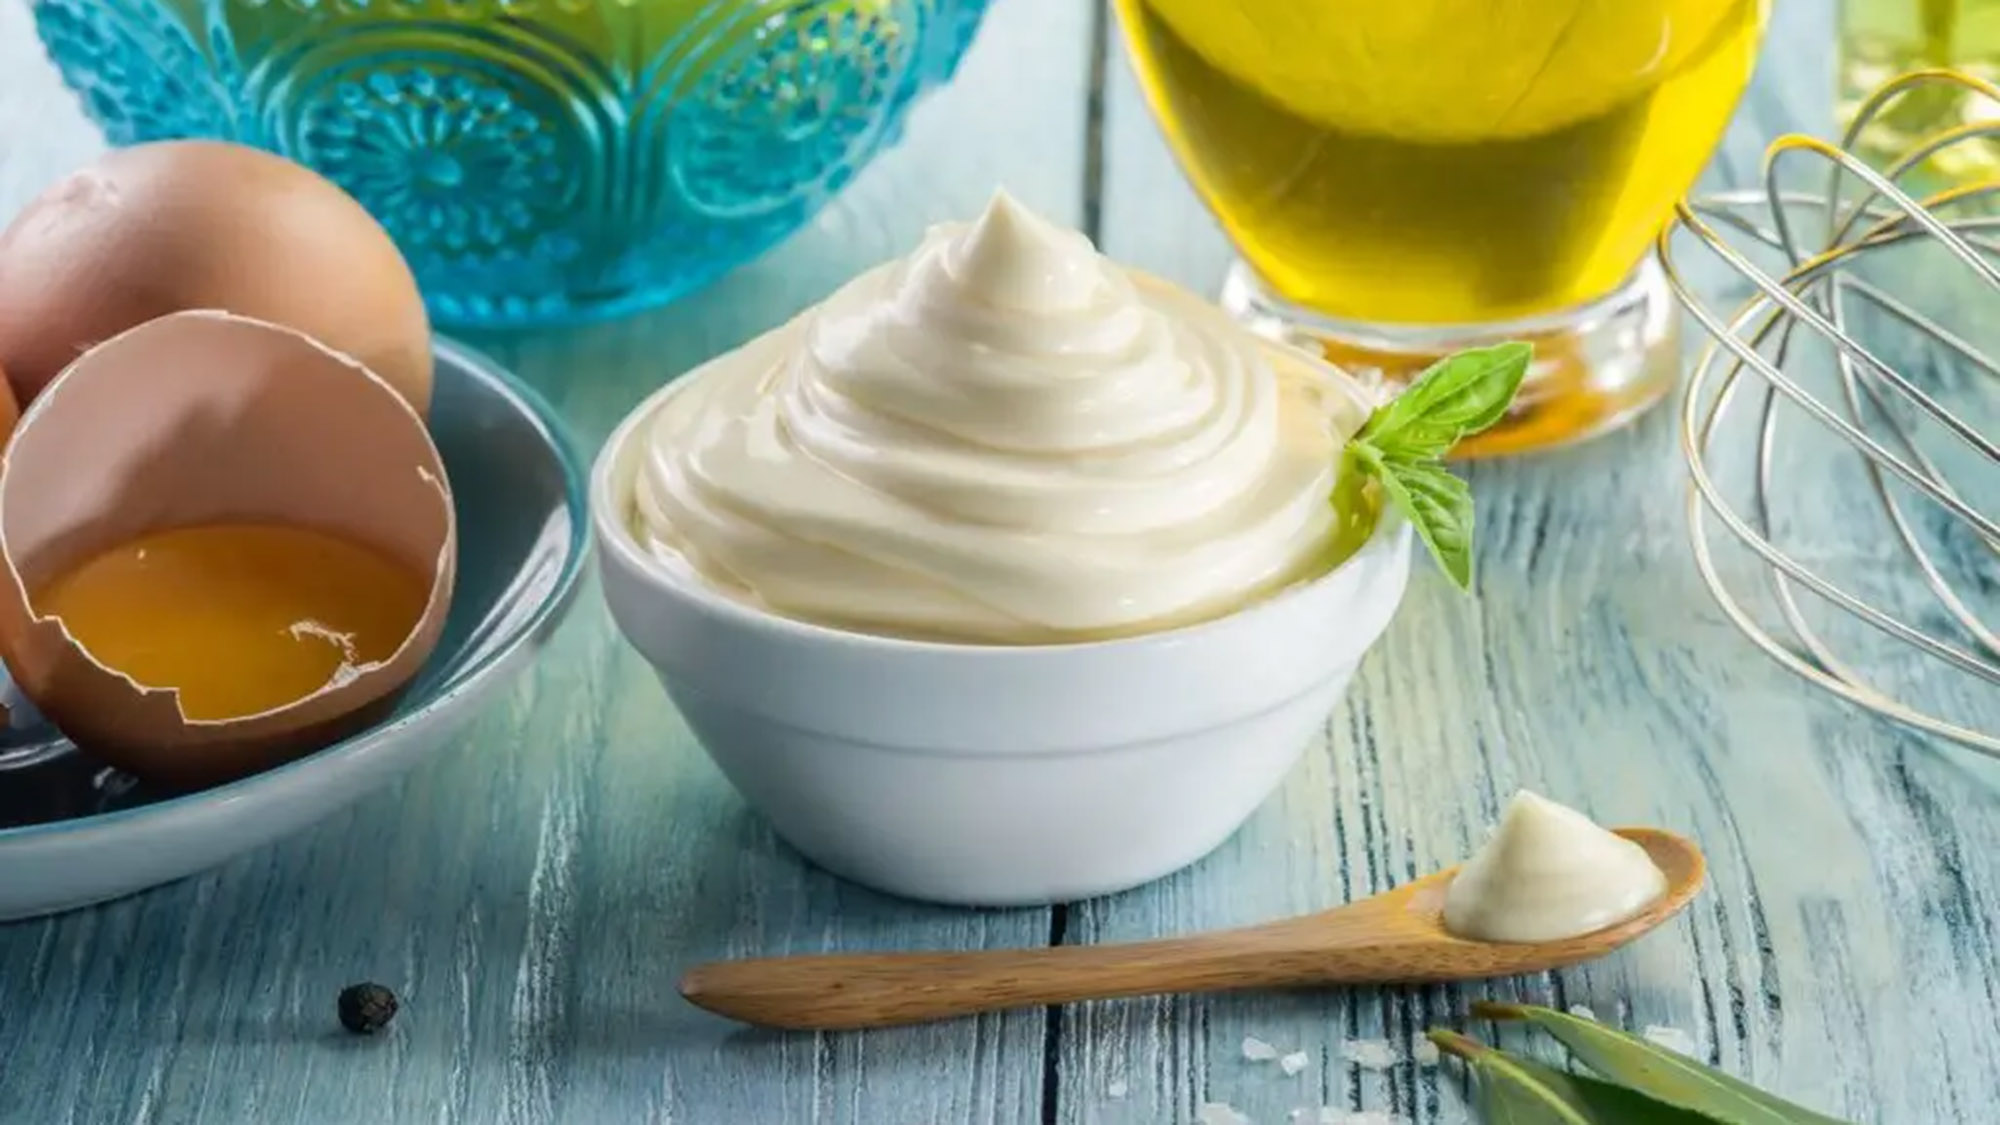 Mayonnaise is disgusting, and science agrees